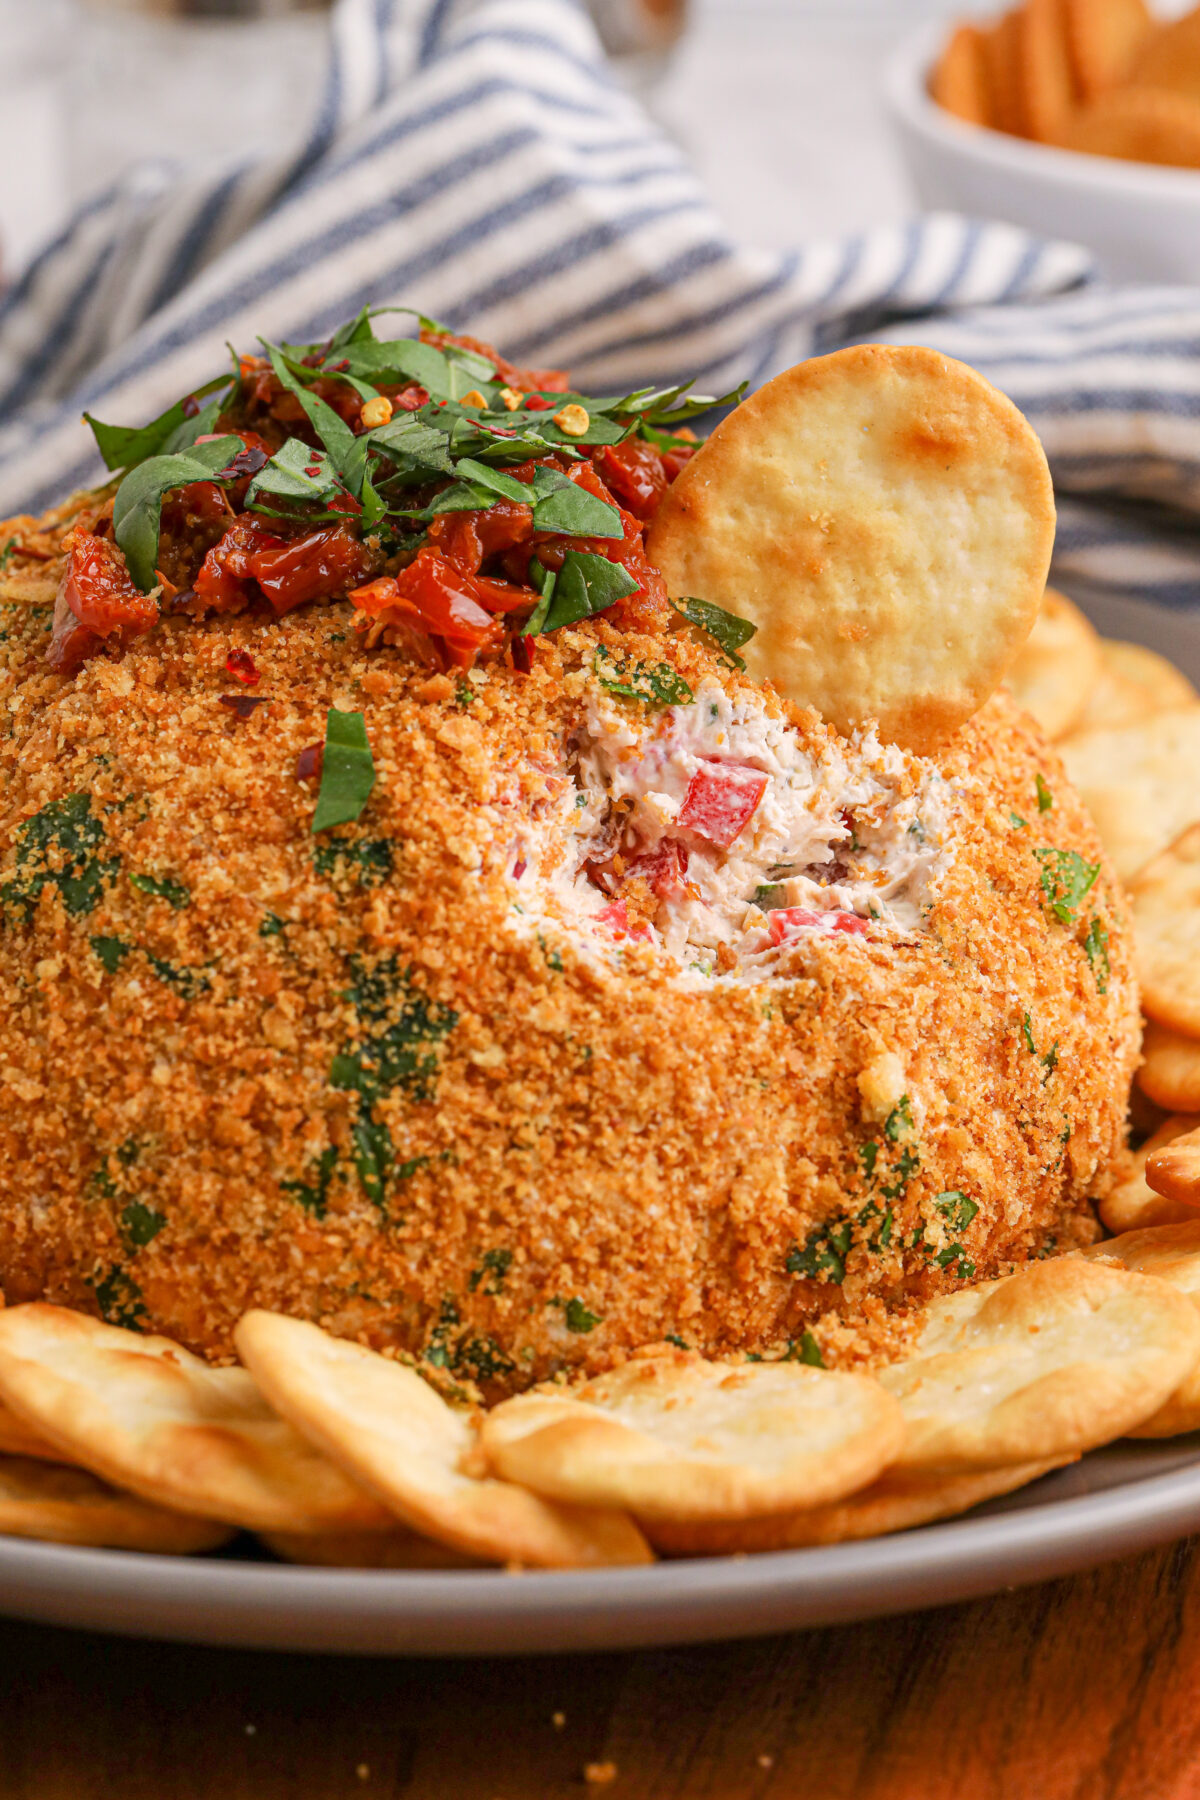 Elevate your party food game with this delicious and easy-to-make bruschetta cheese ball recipe. Your guests will thank you!